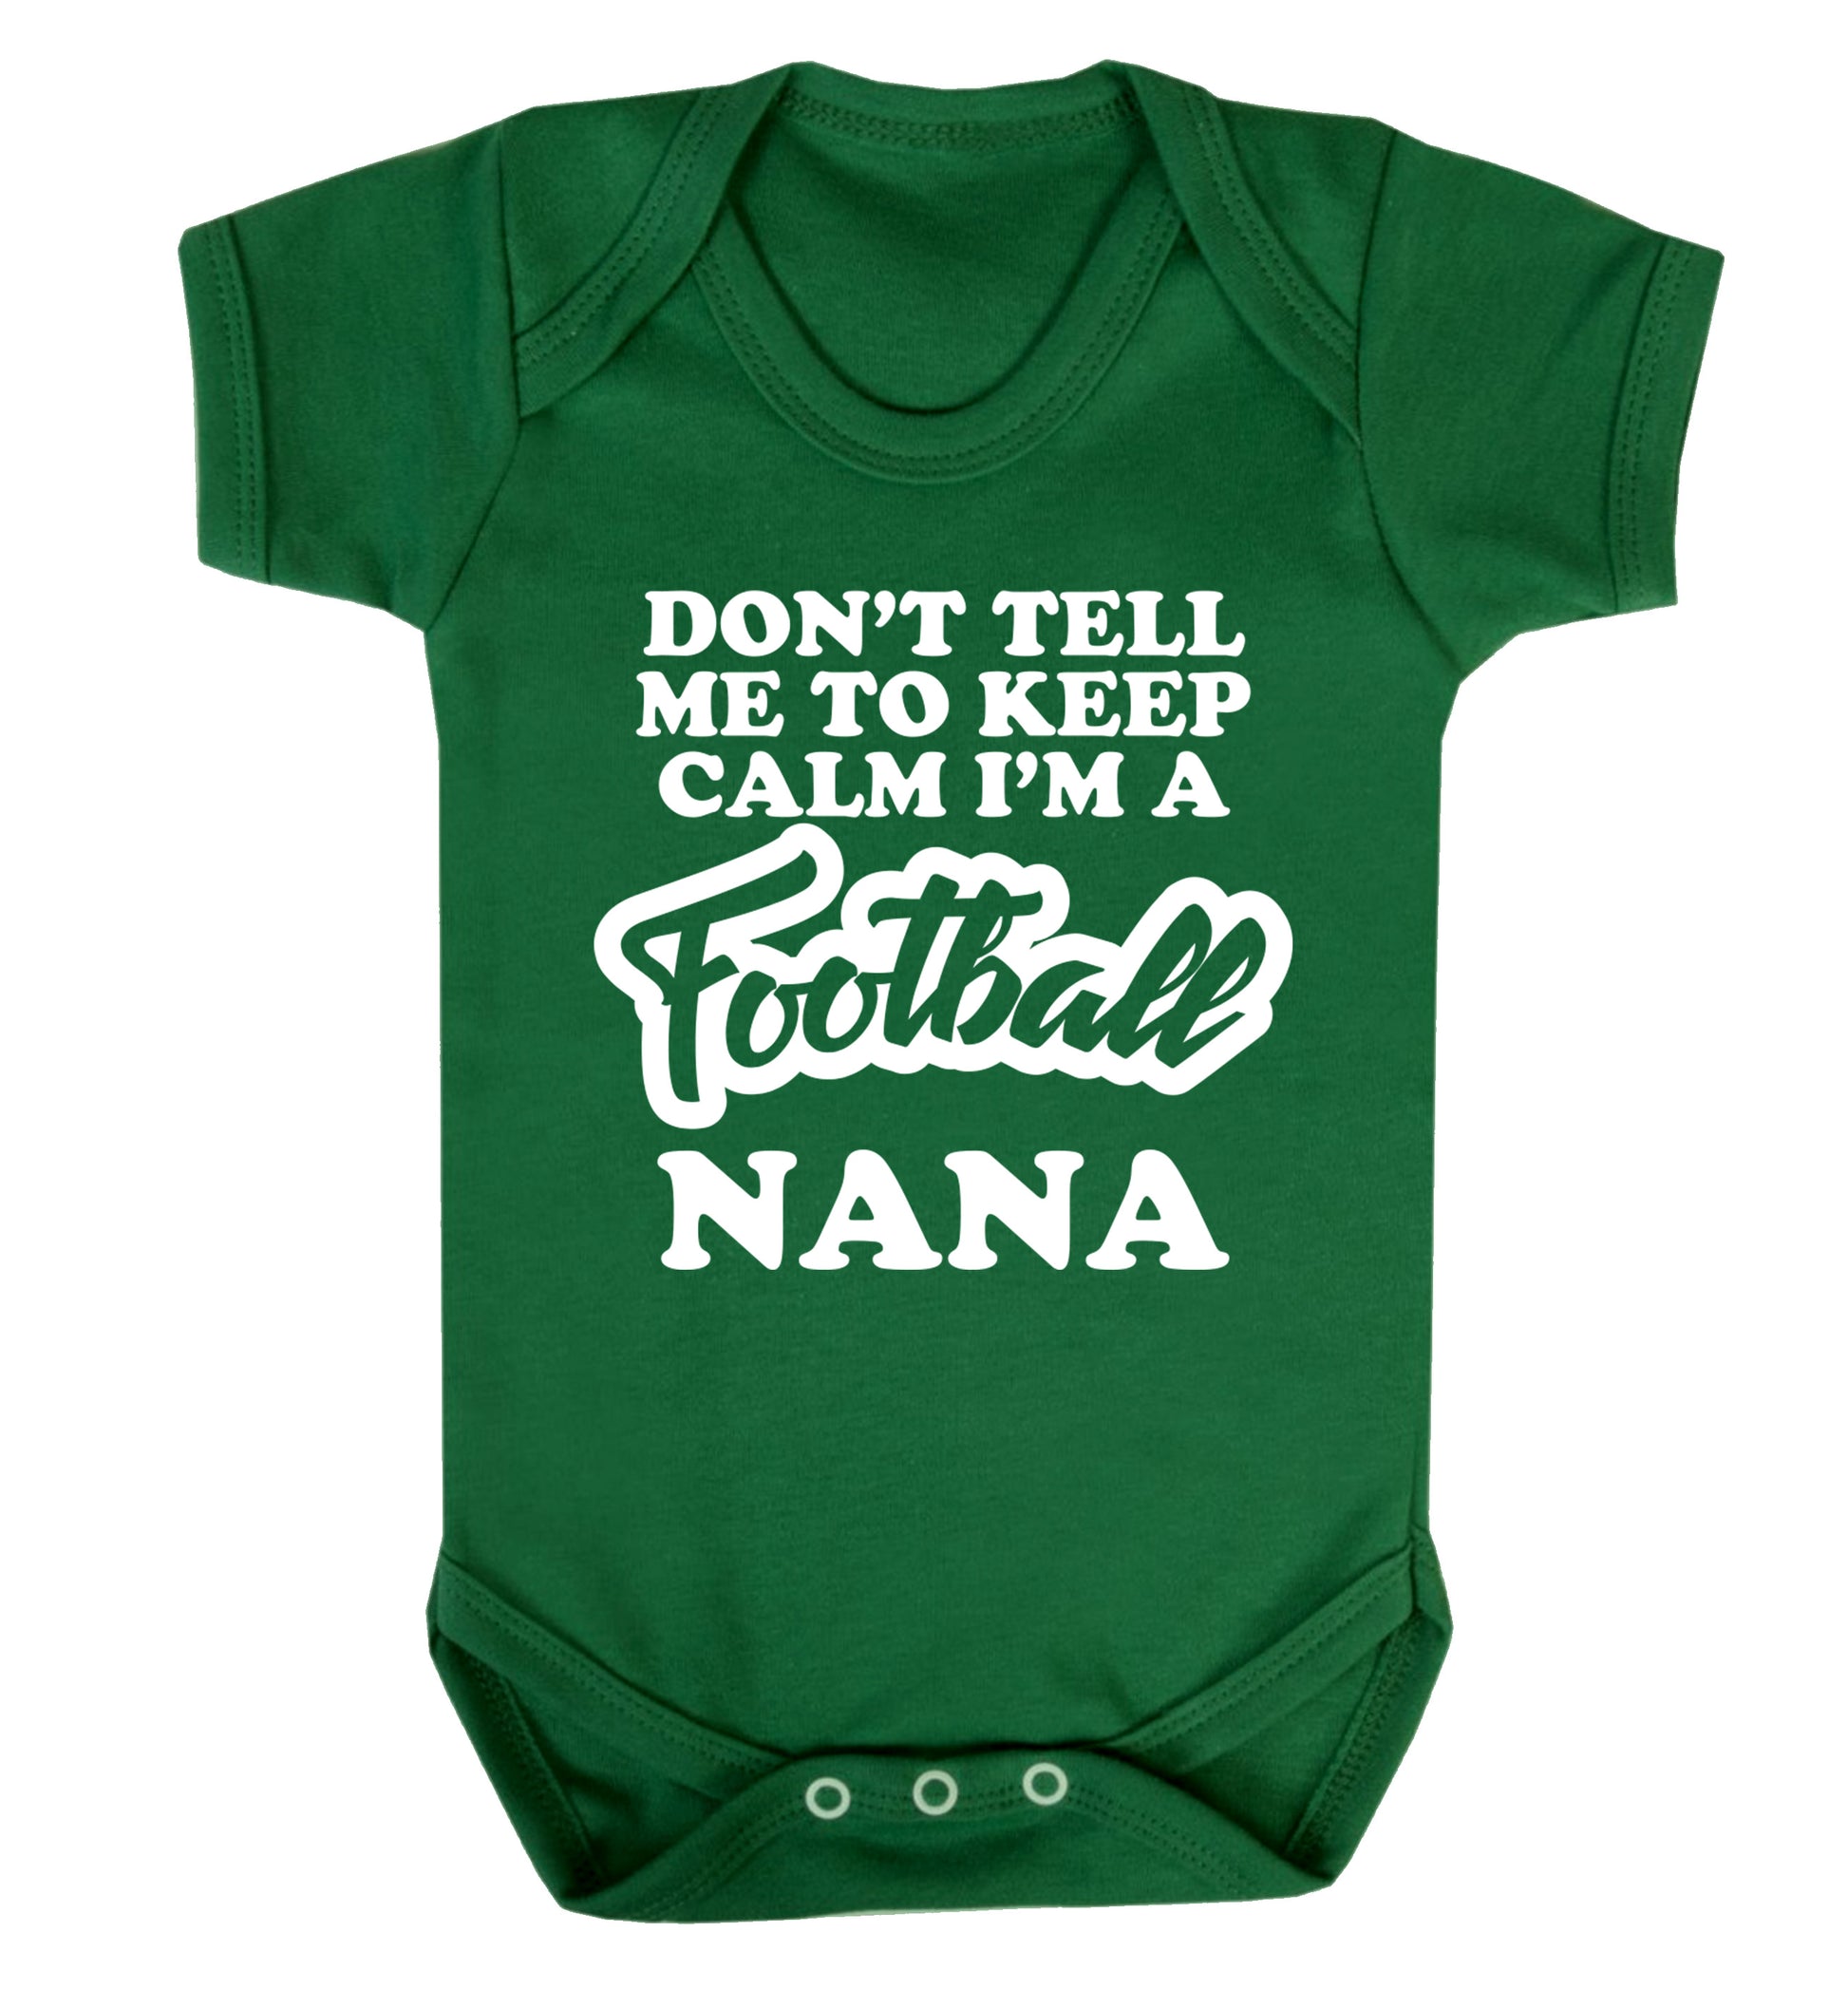 Don't tell me to keep calm I'm a football nana Baby Vest green 18-24 months